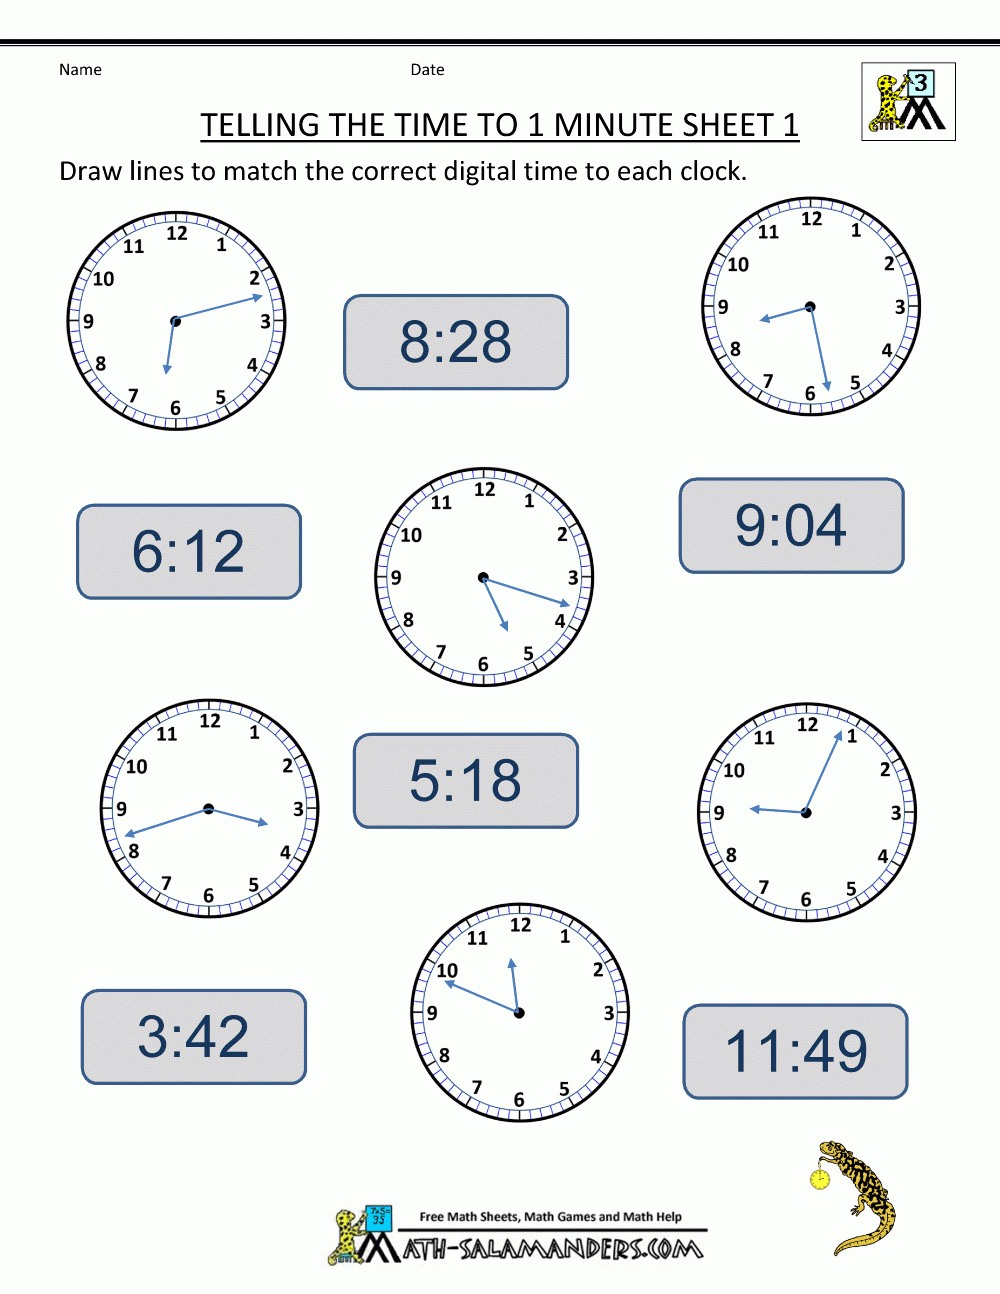 free printable math worksheets for telling time db excelcom